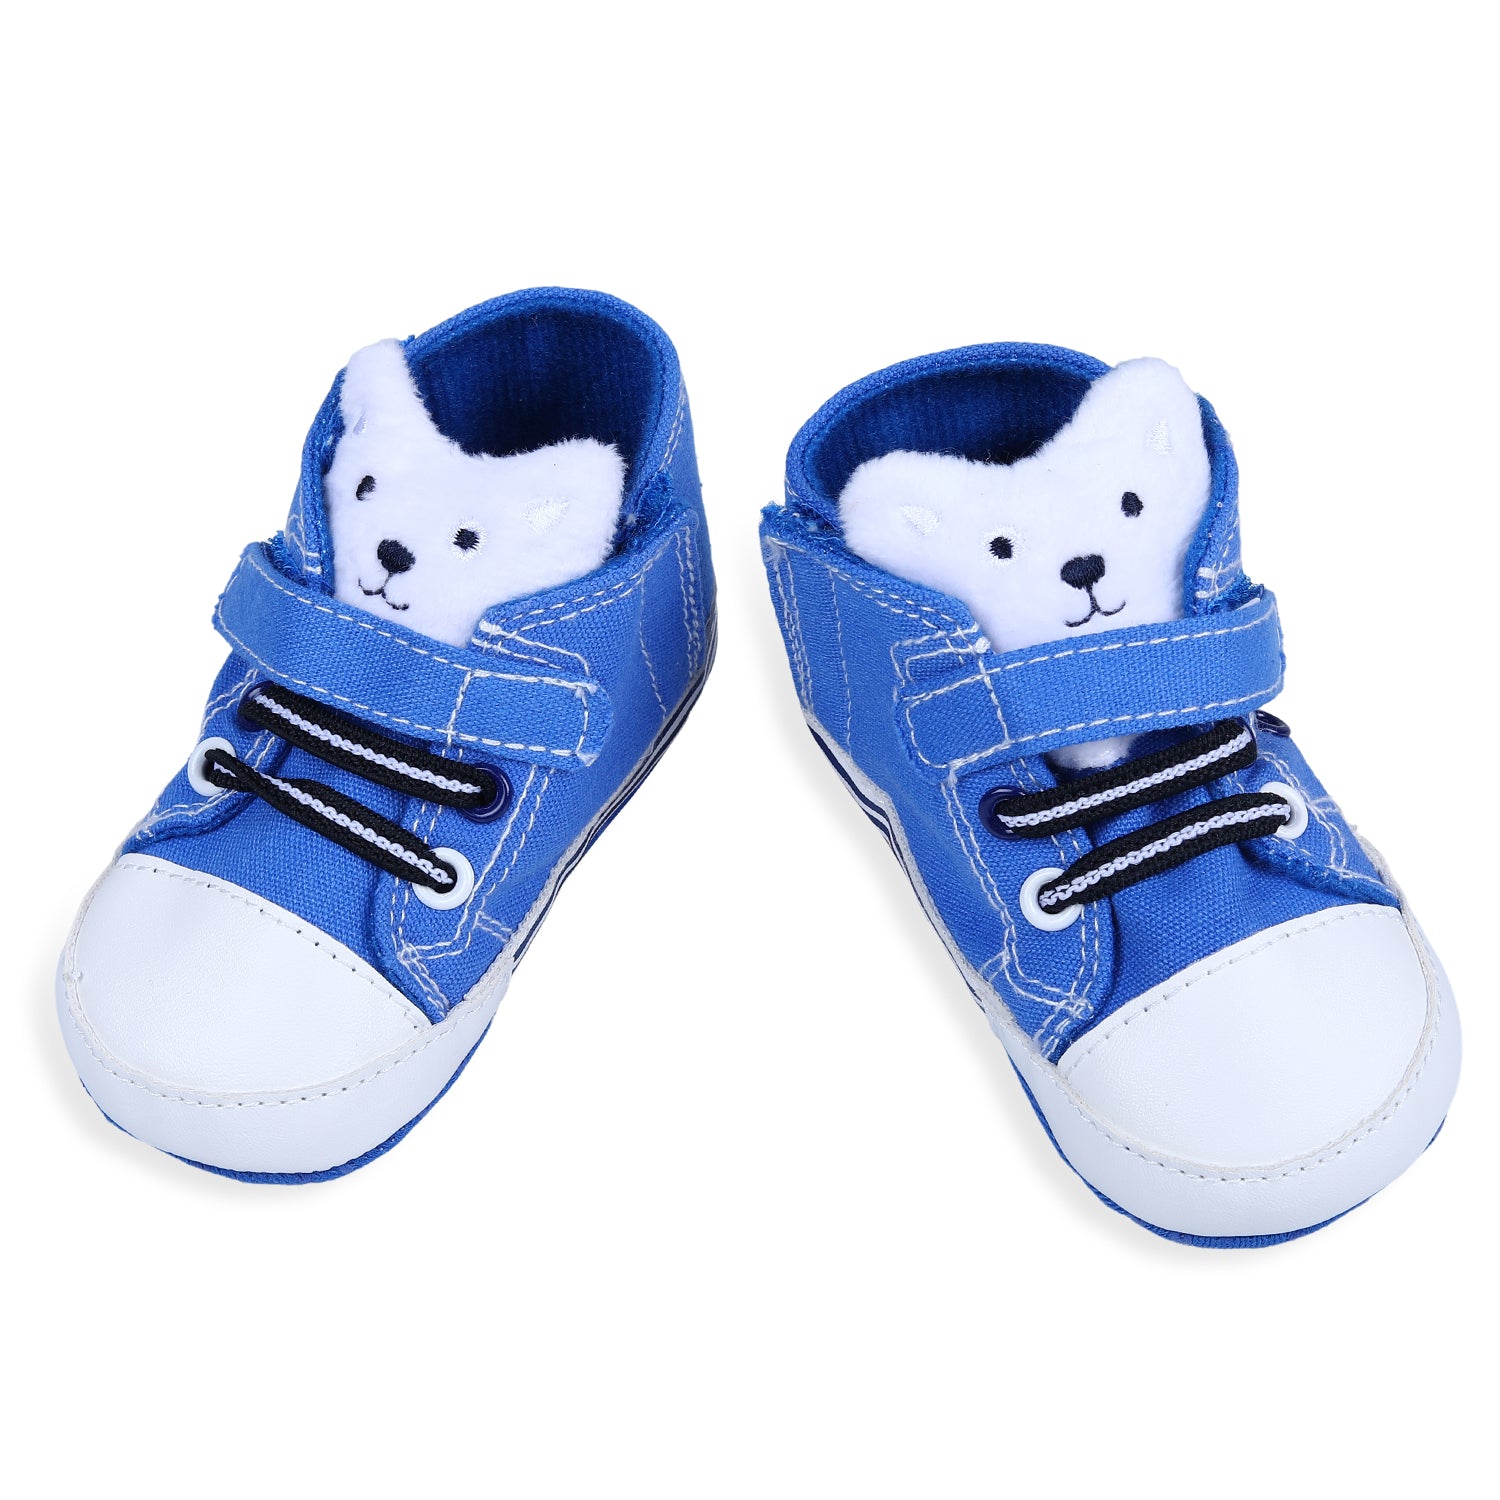 My Buddy Bear Cute And Stylish Comfy Velcro Booties - Blue - Baby Moo